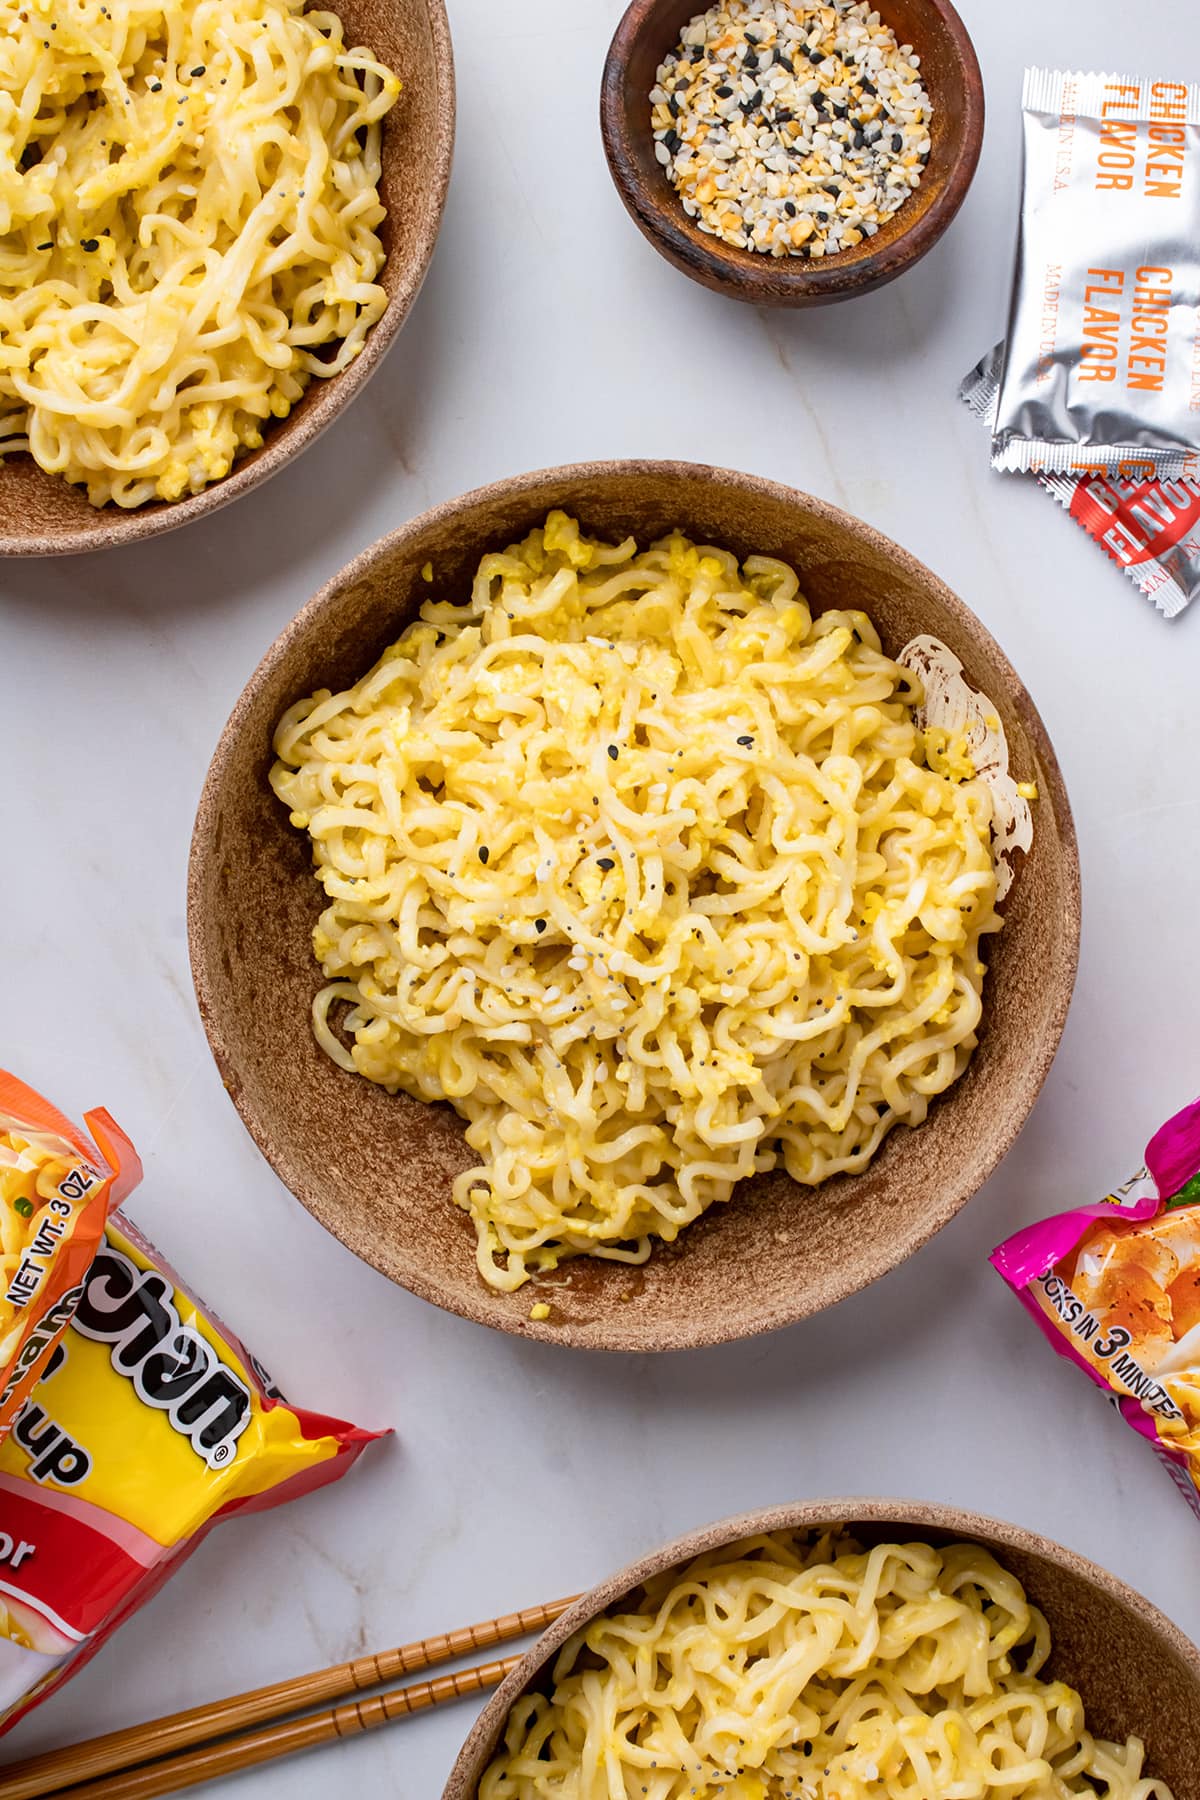 Overhead view of Kylie Jenner's Ramen noodles in a bowl surrounded by more ramen noodles, spices, and chopsticks.